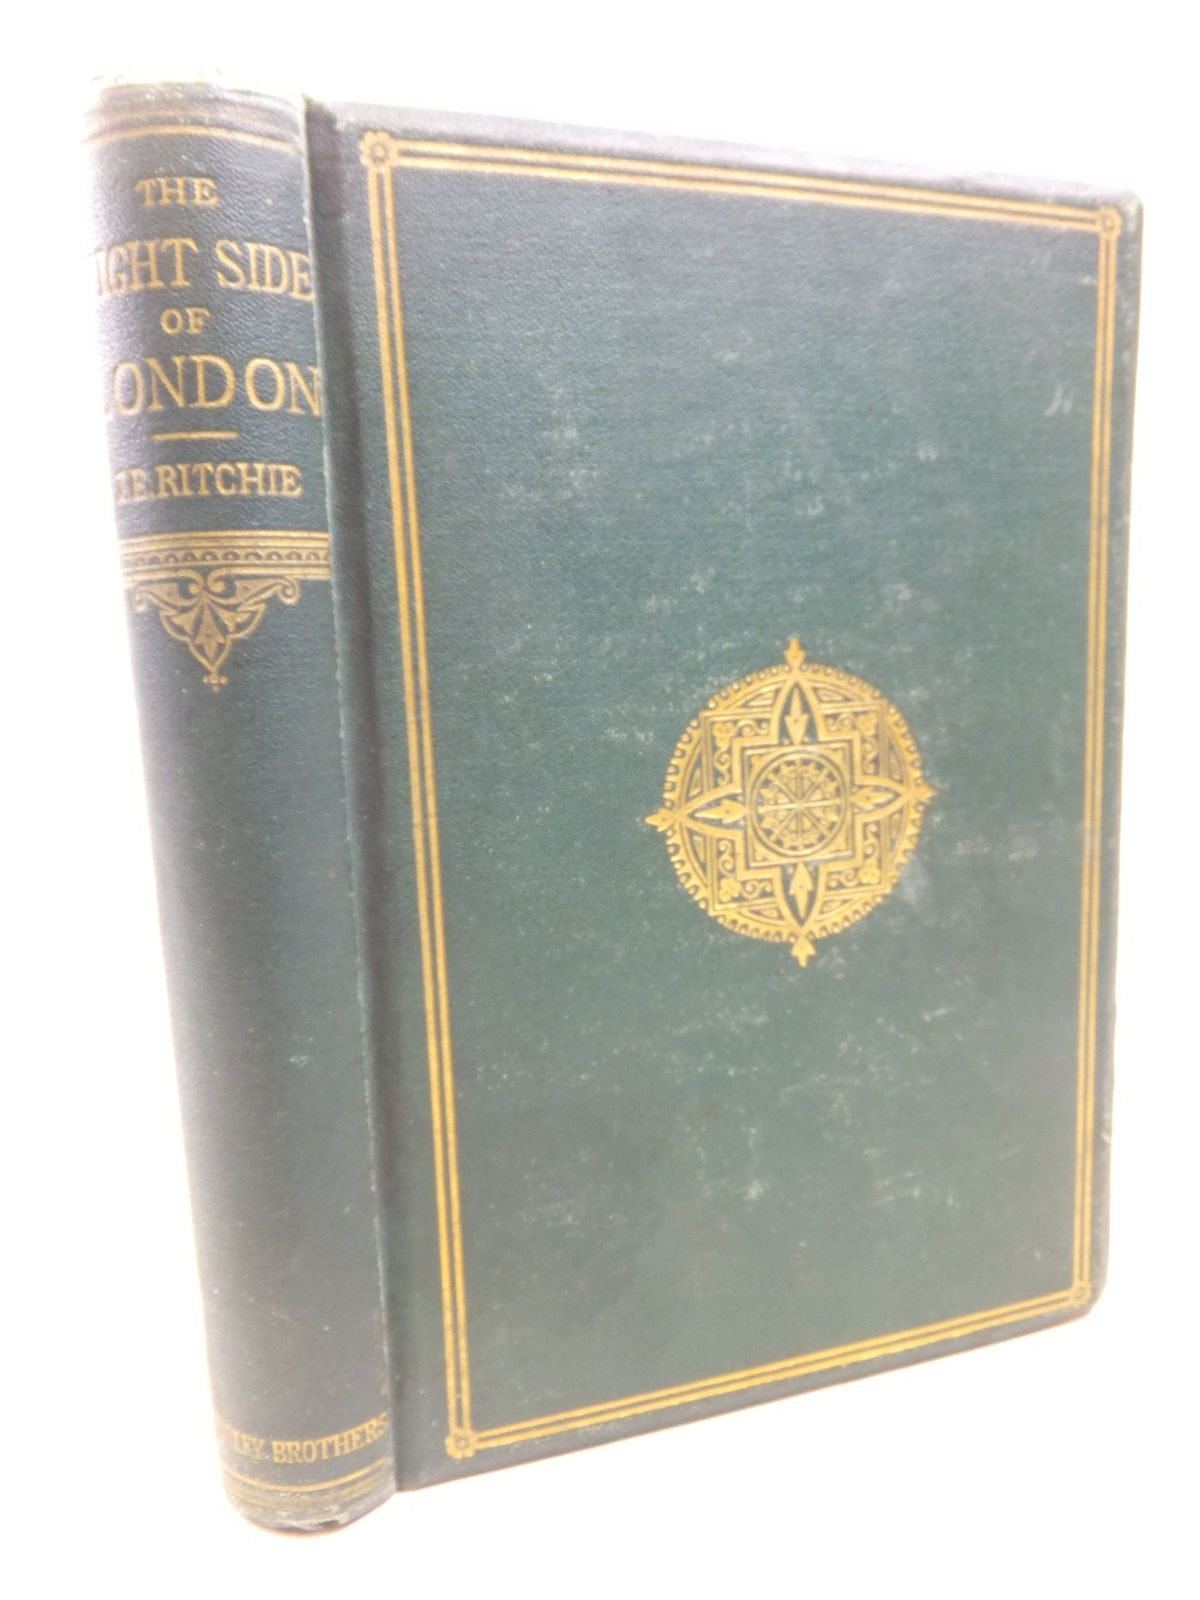 Photo of THE NIGHT SIDE OF LONDON written by Ritchie, J. Ewing published by Tinsley Brothers (STOCK CODE: 1712933)  for sale by Stella & Rose's Books